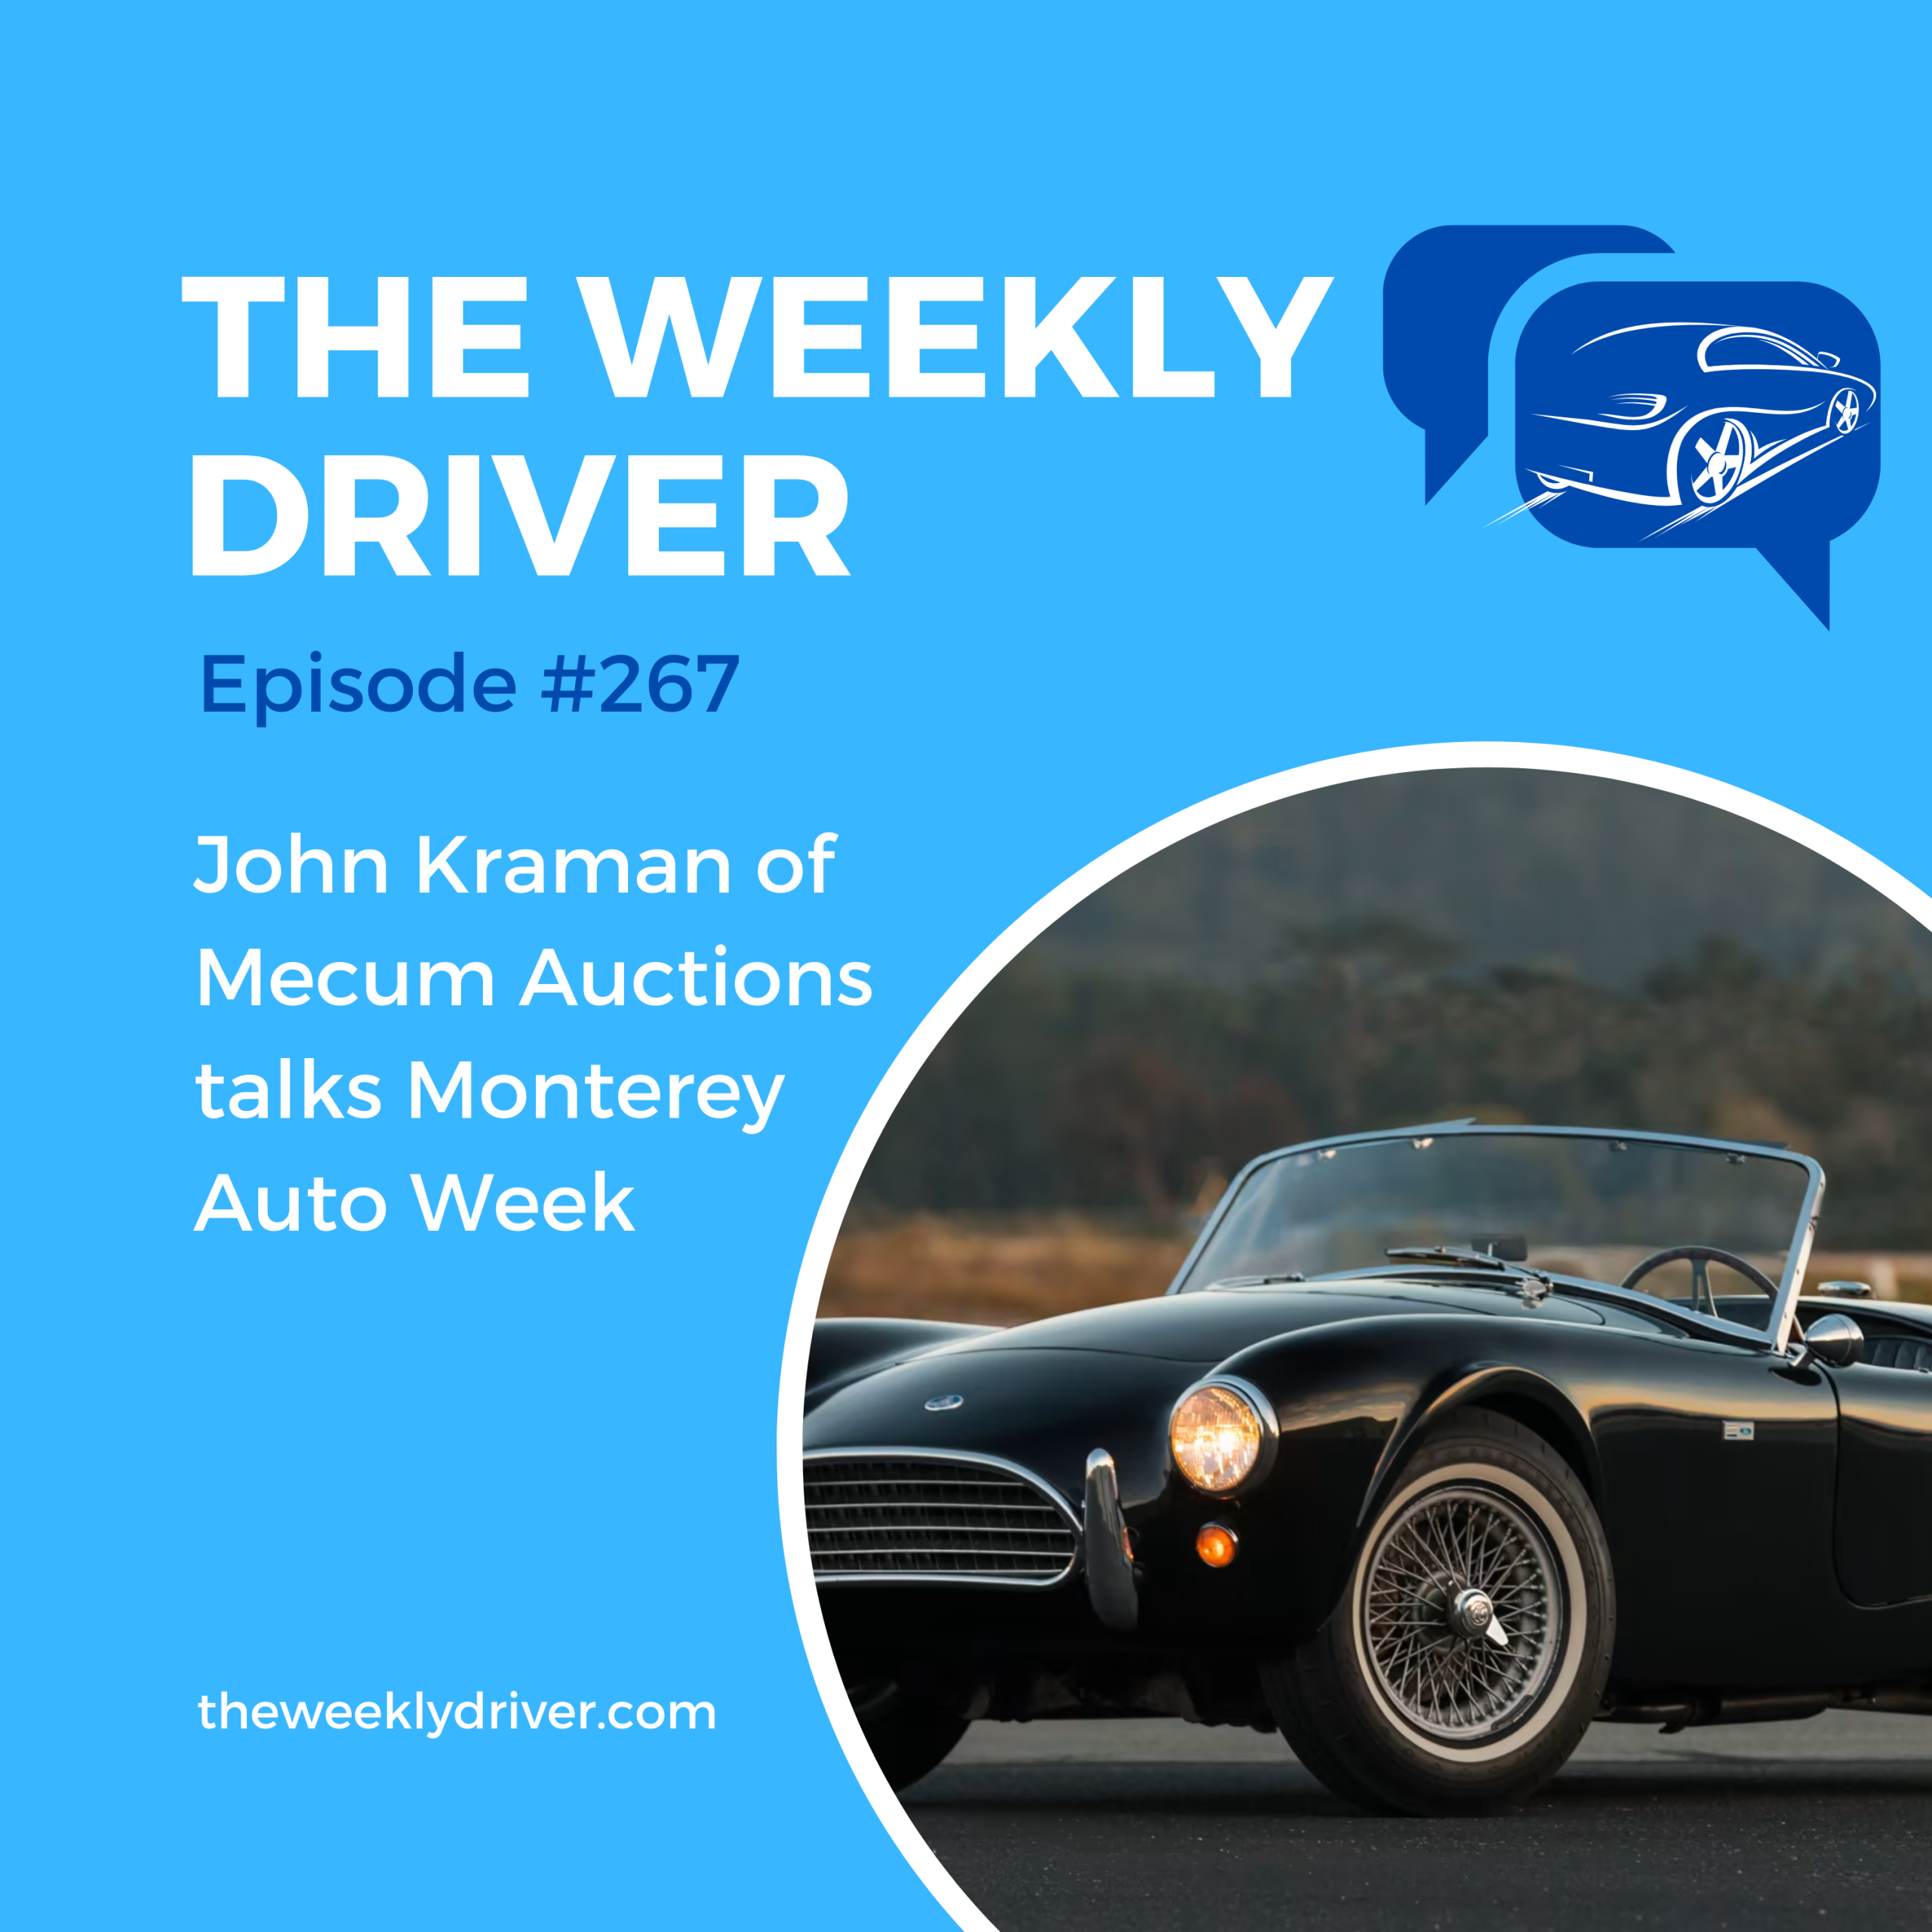 The Weekly Driver Podcast Episode 267 John Kraman Mecum Auctions